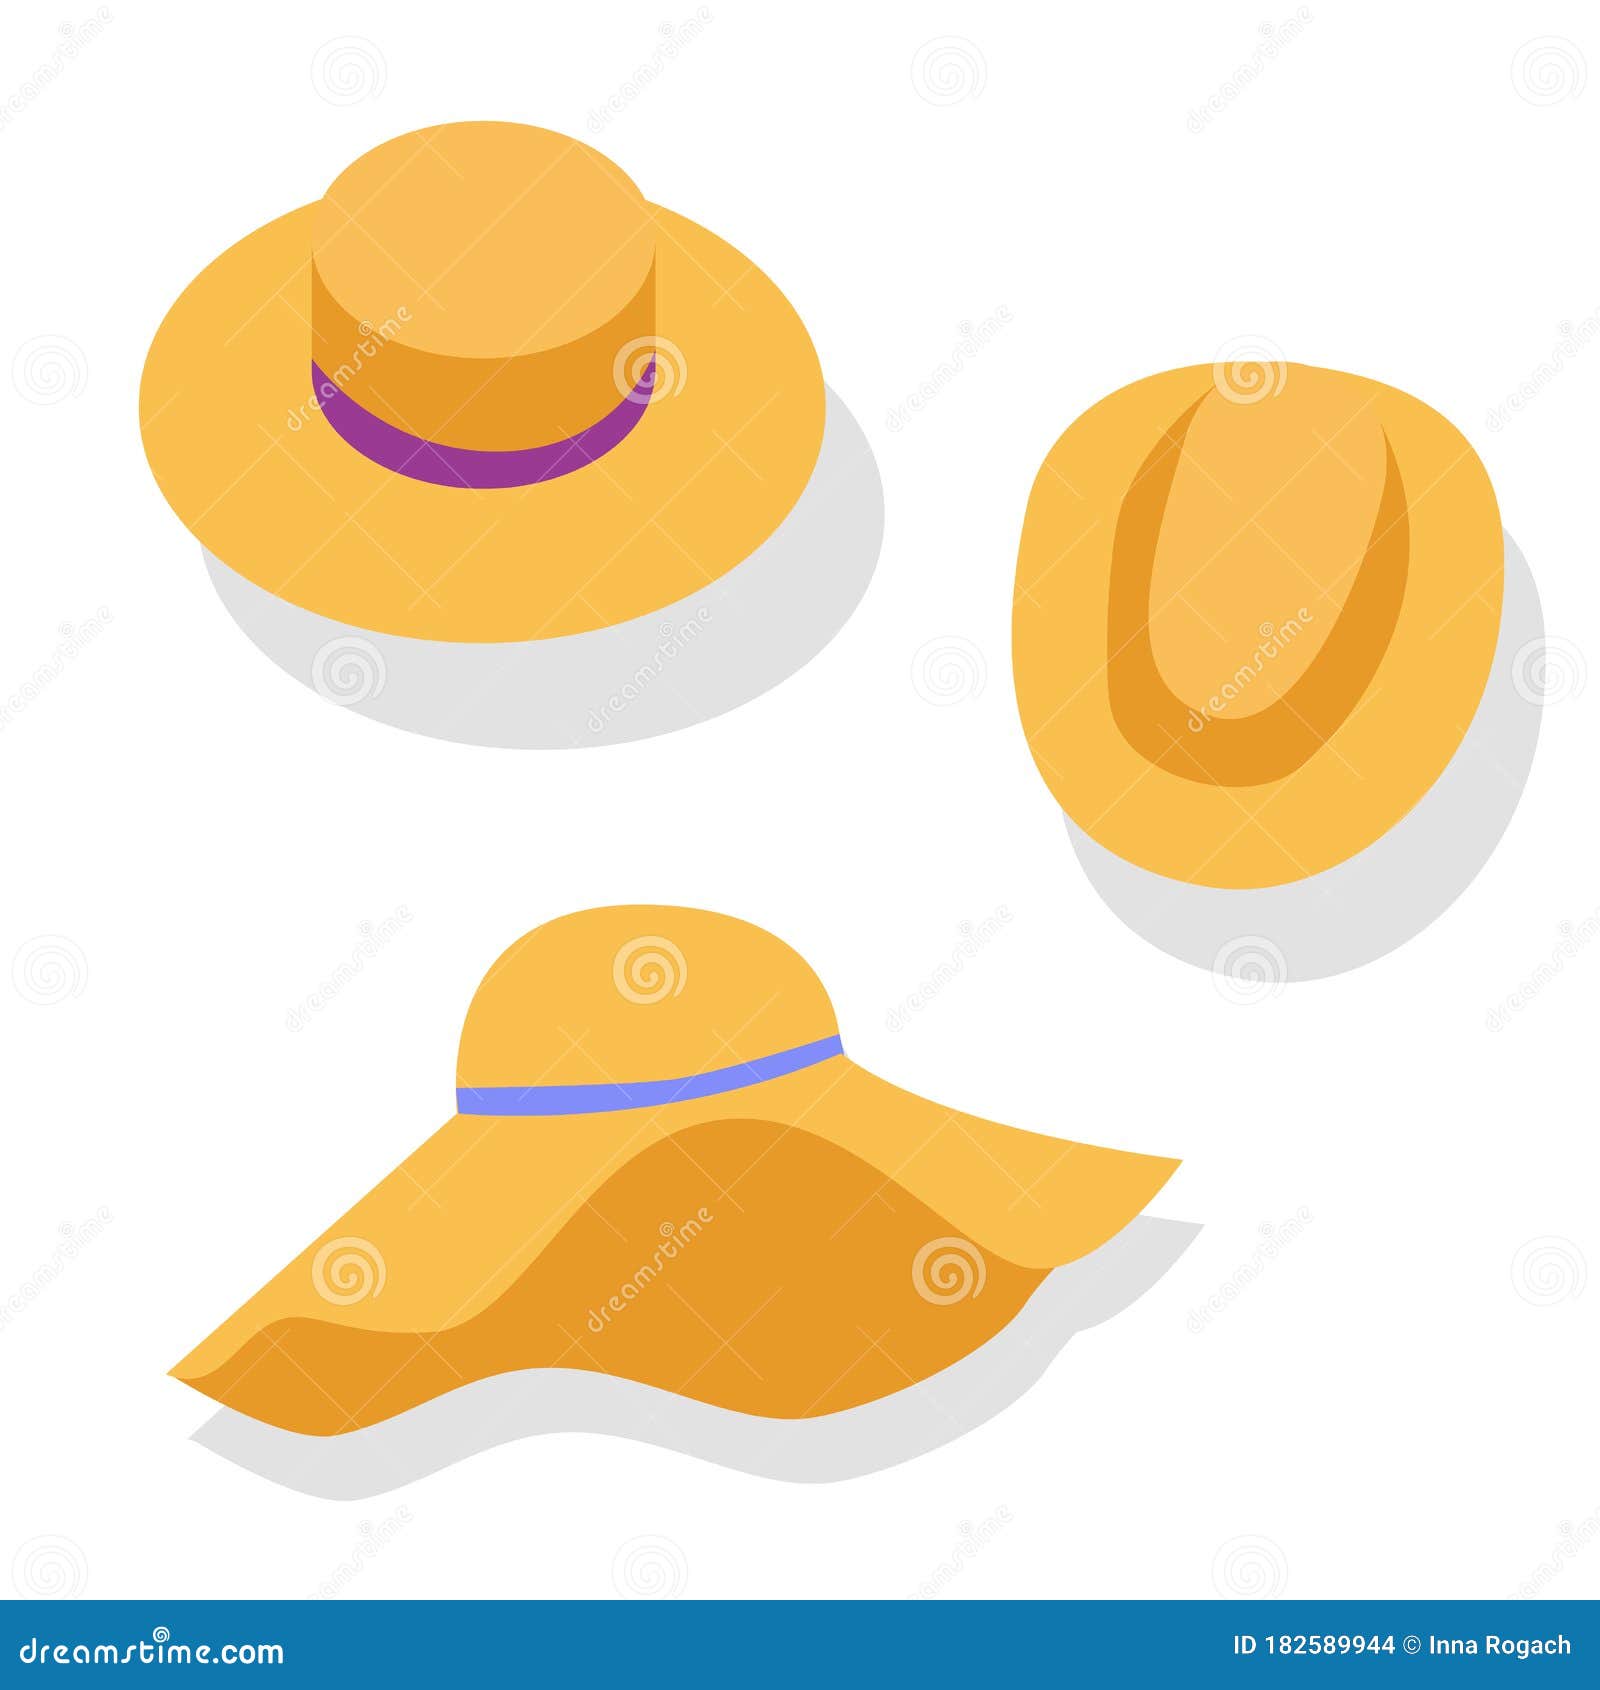 A Close Up of Graphics. Hat Types of Icons Set Headdress. Stock Vector ...